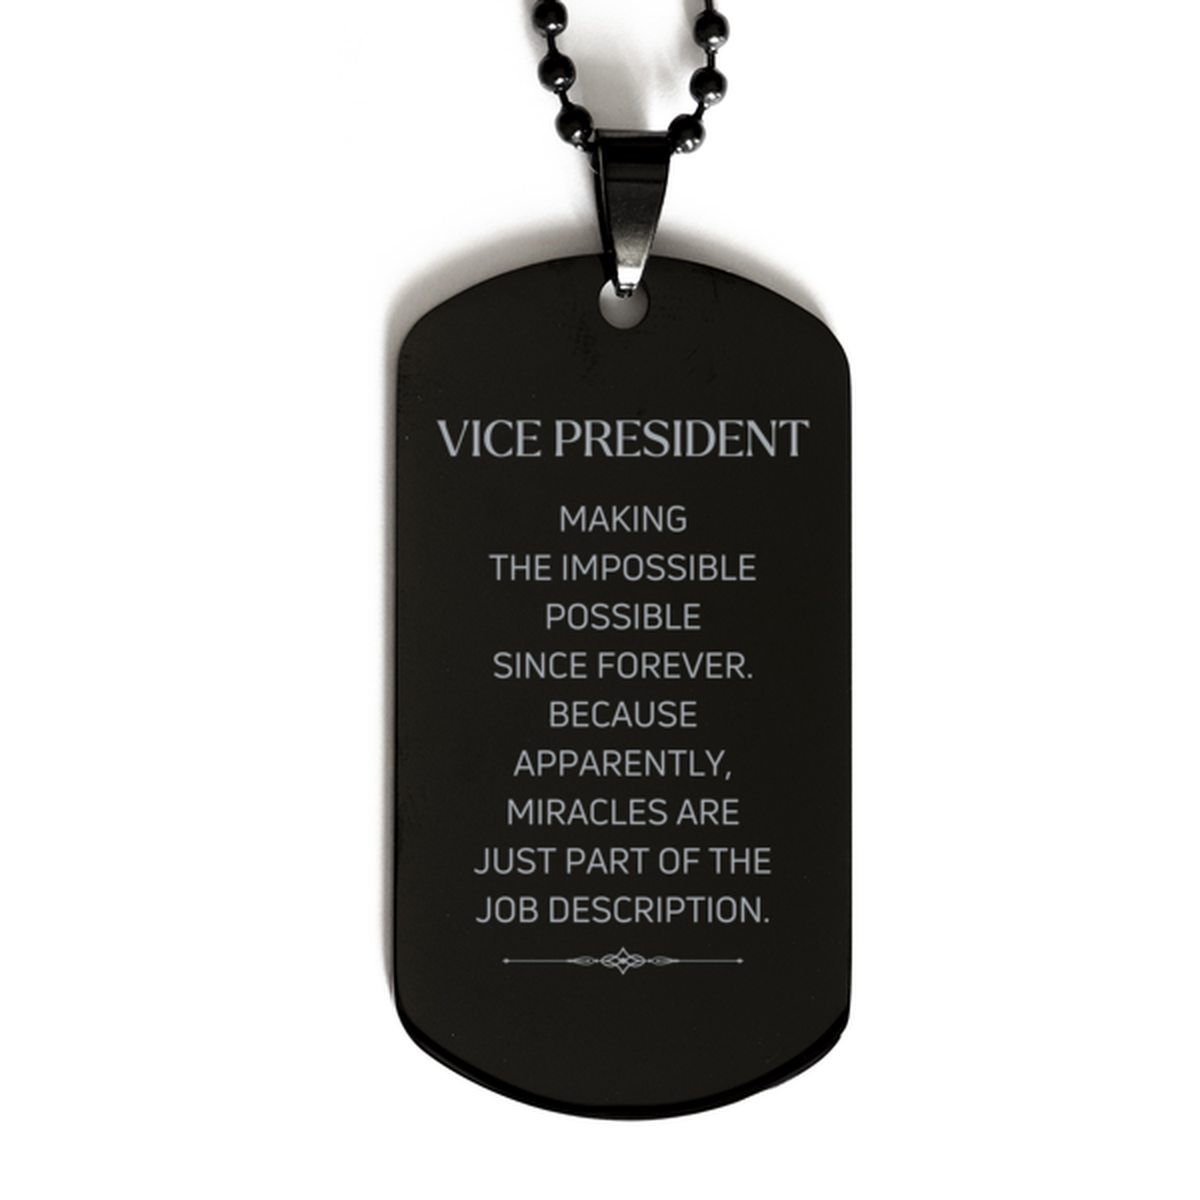 Funny Vice President Gifts, Miracles are just part of the job description, Inspirational Birthday Black Dog Tag For Vice President, Men, Women, Coworkers, Friends, Boss